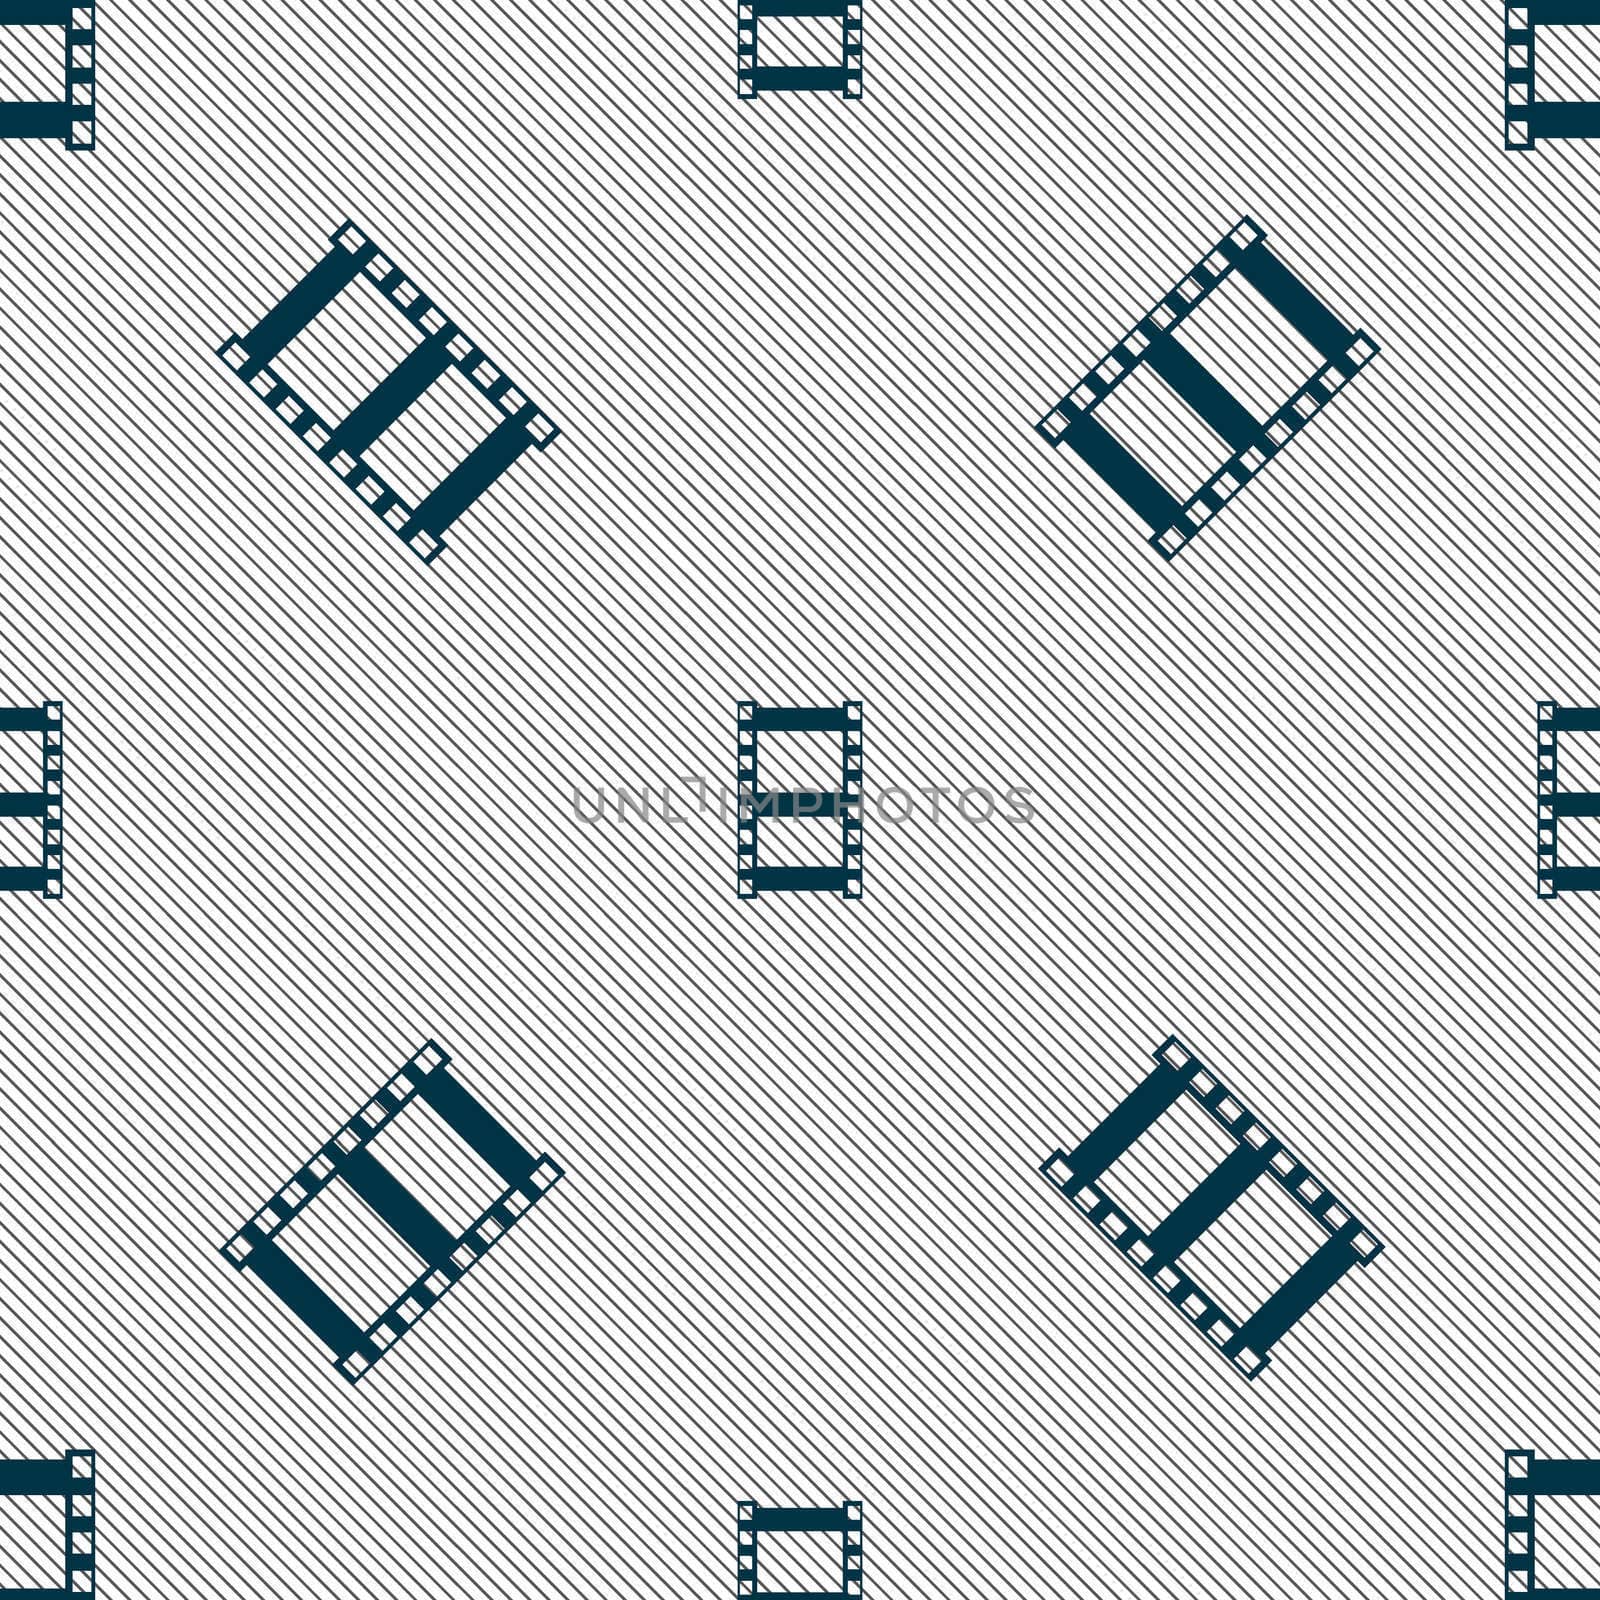 Video sign icon. Video frame symbol. Seamless pattern with geometric texture. illustration